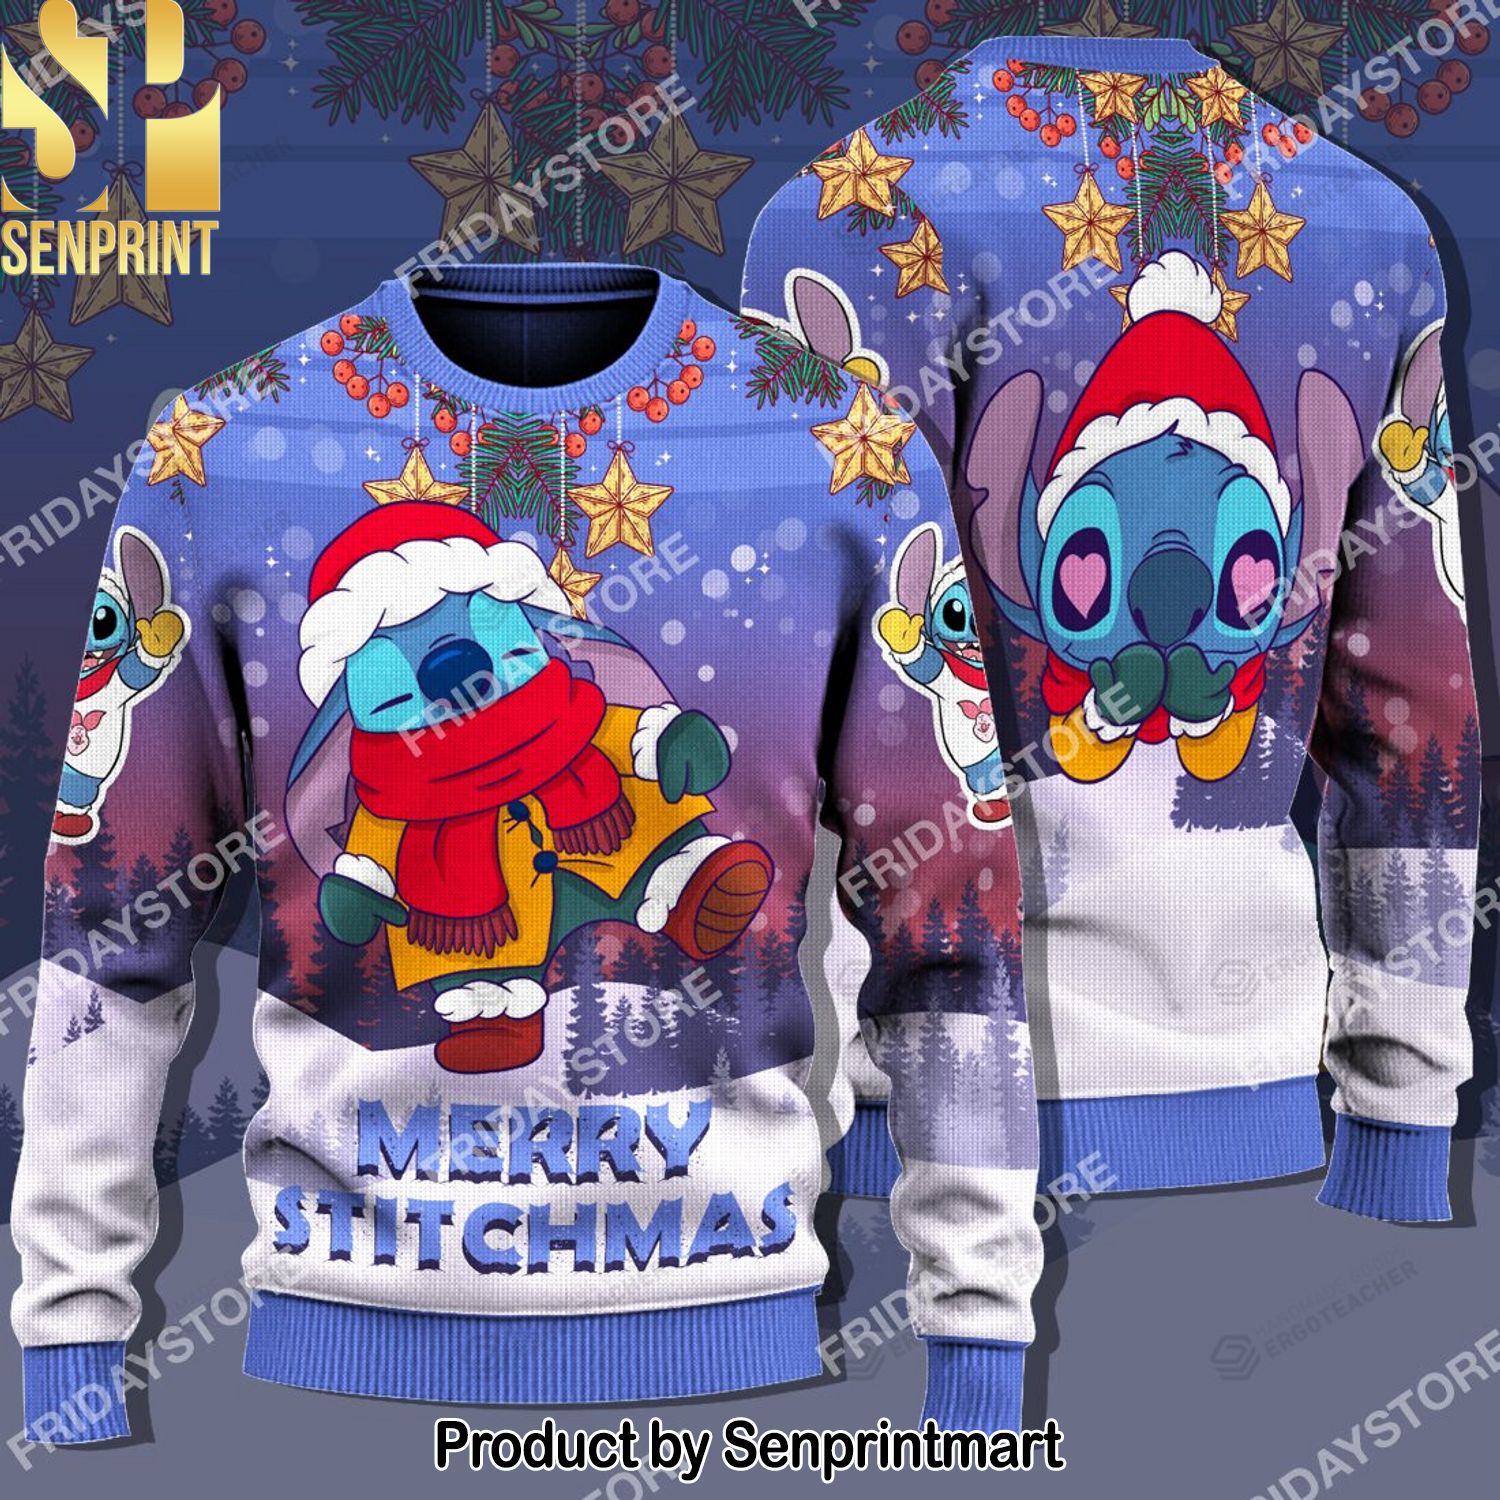 LAS Merry Stitchmas Adorable For Christmas Gifts Ugly Christmas Sweater